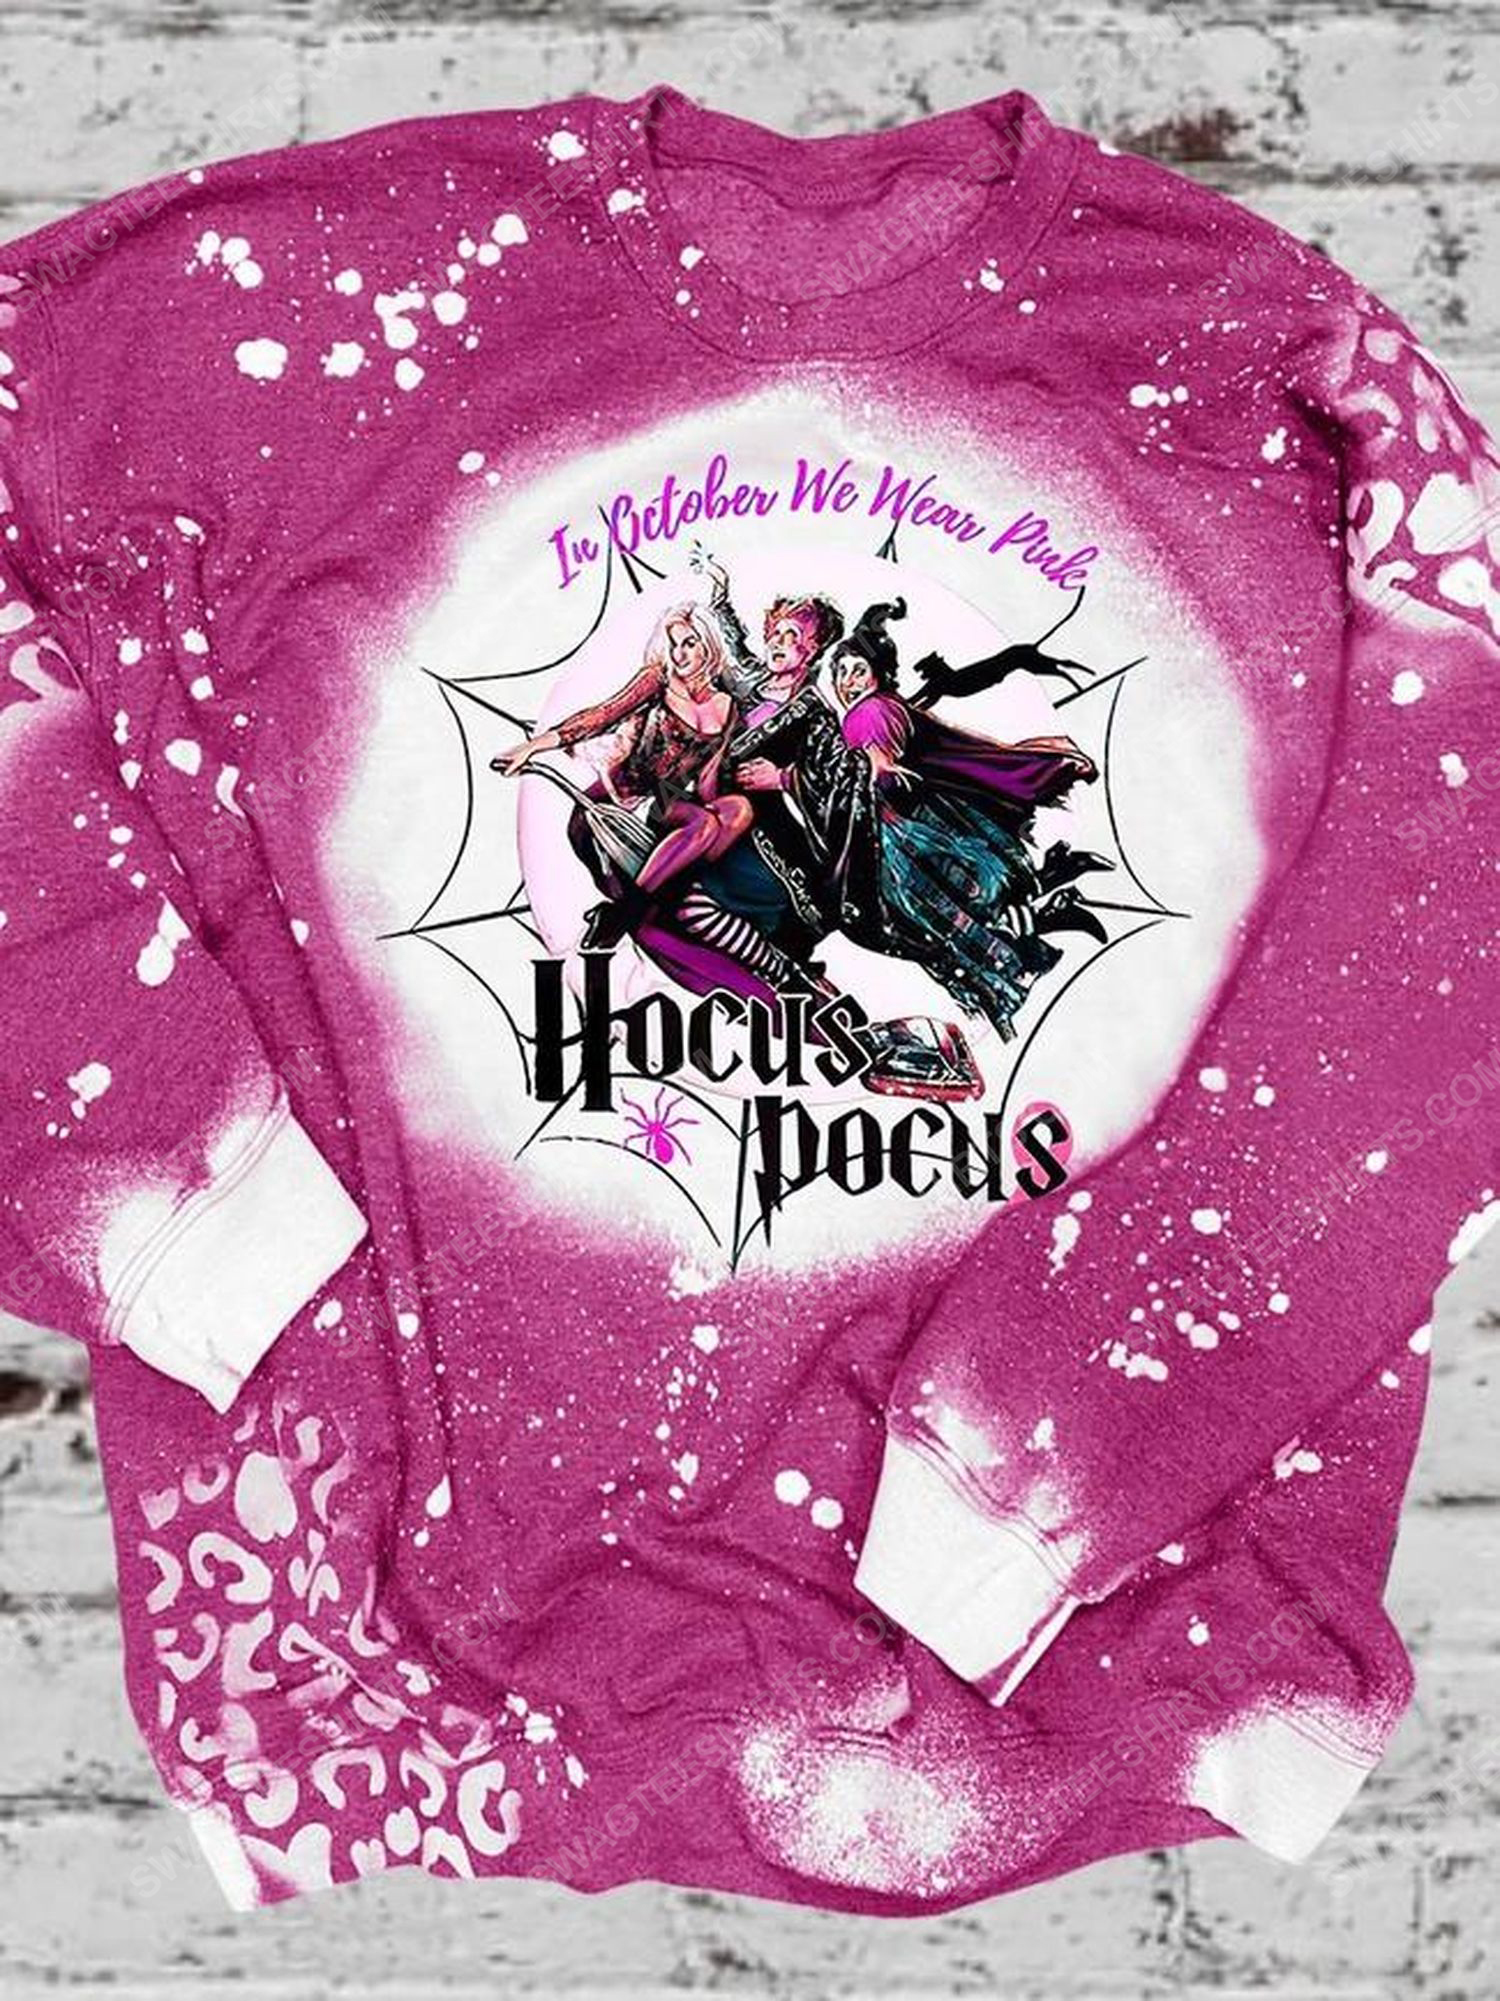 Breast cancer in october we wear pink hocus pocus full print shirt 1 - Copy